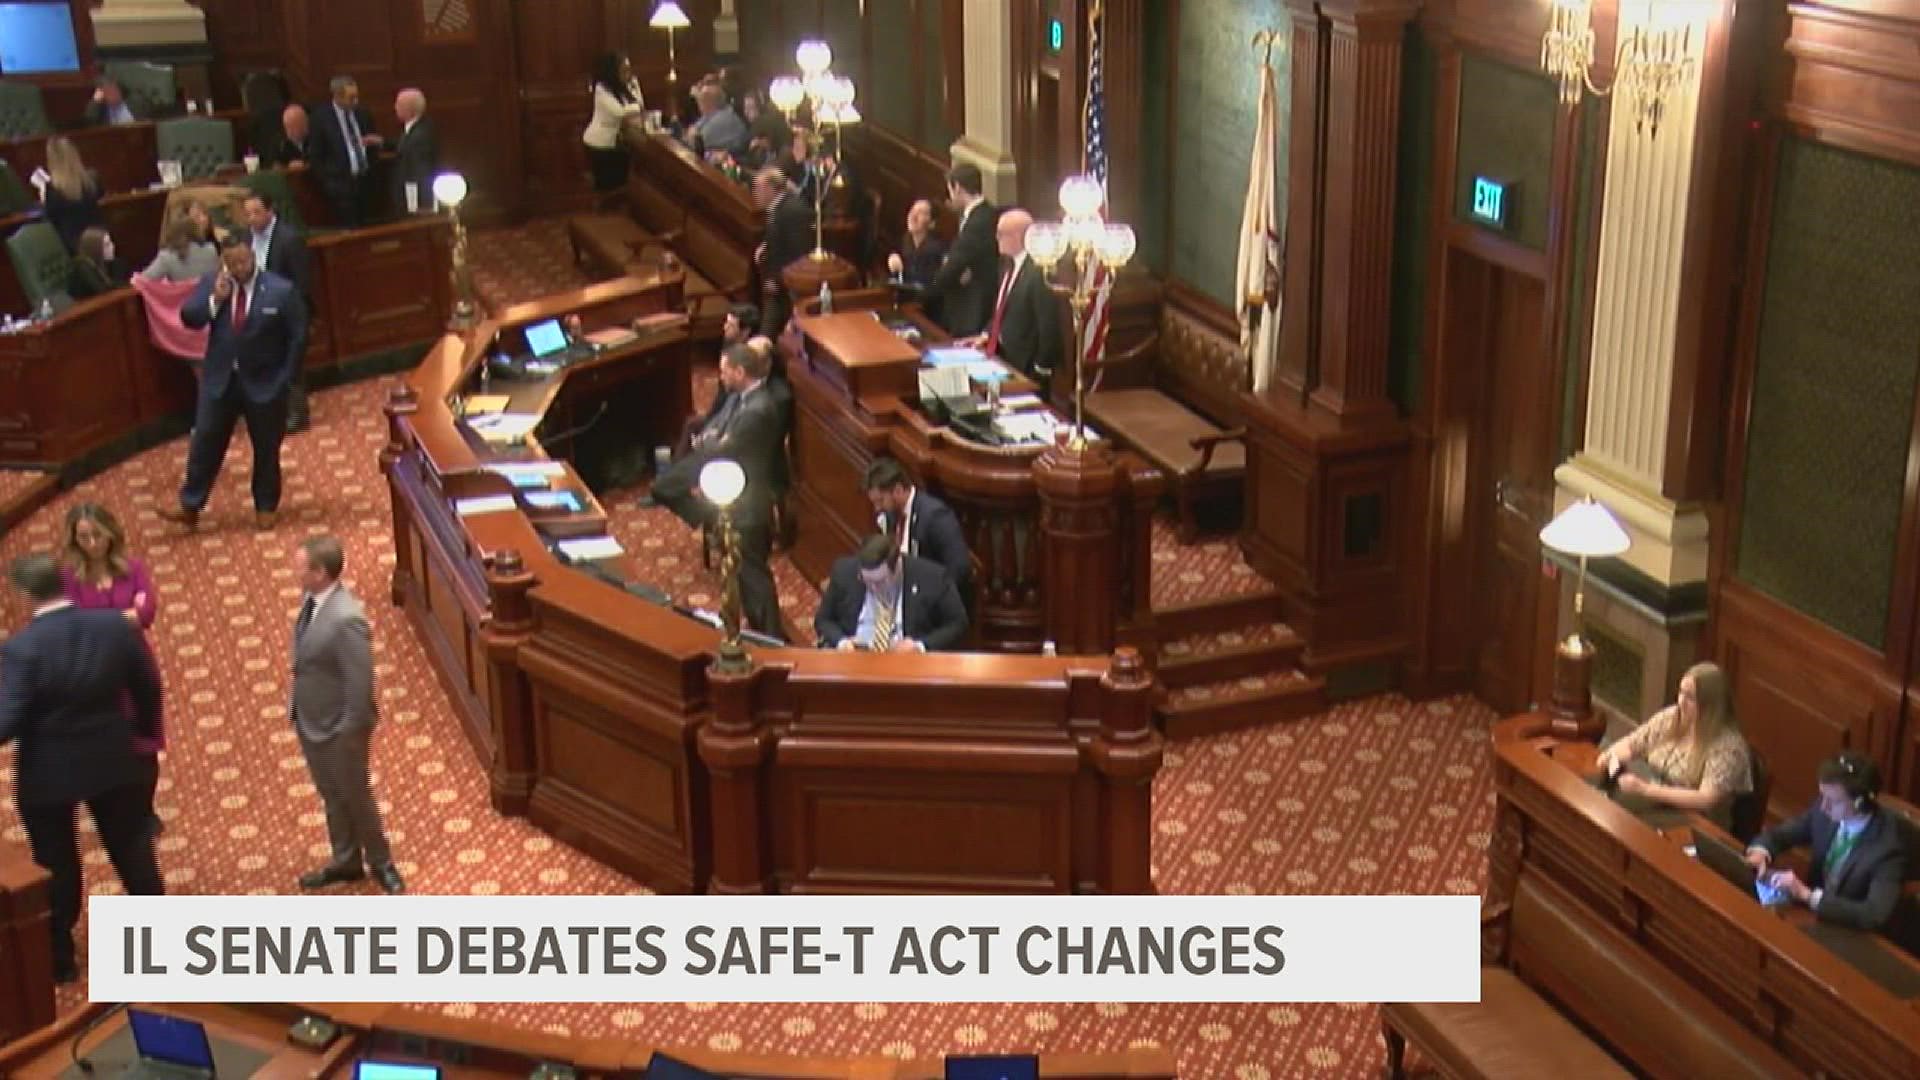 The Illinois House and Senate passed the measure on the final legislative day of the year.